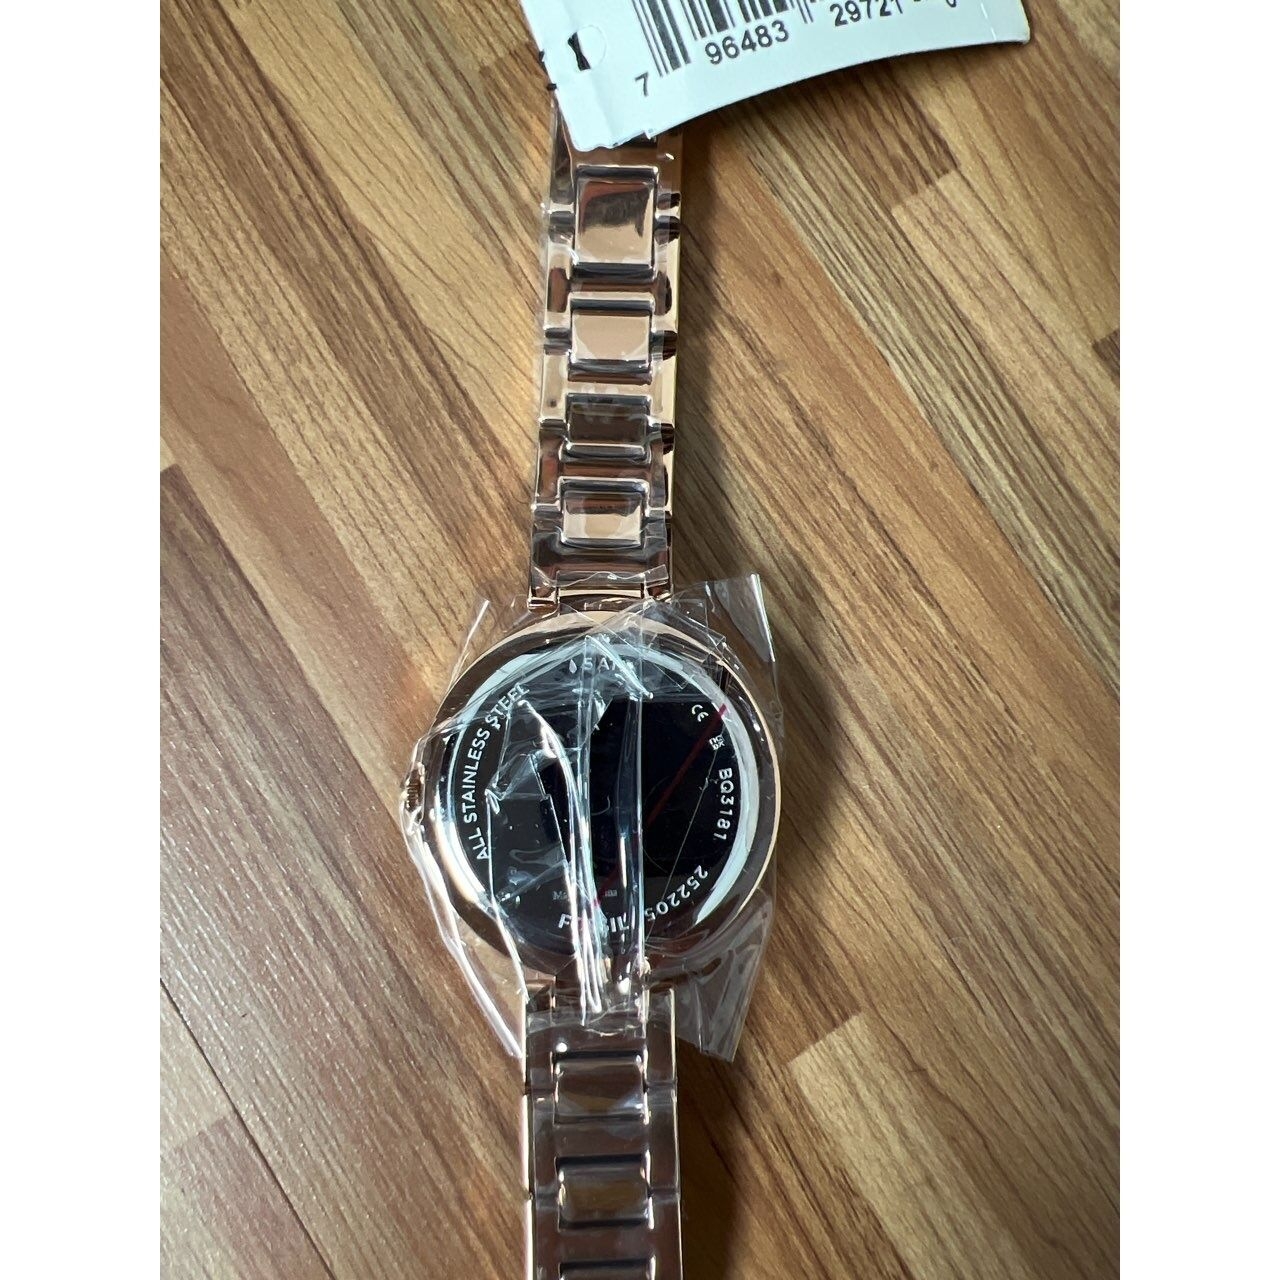 Fossil Karli Three-Hand Rose Gold Stainless Steel Watch